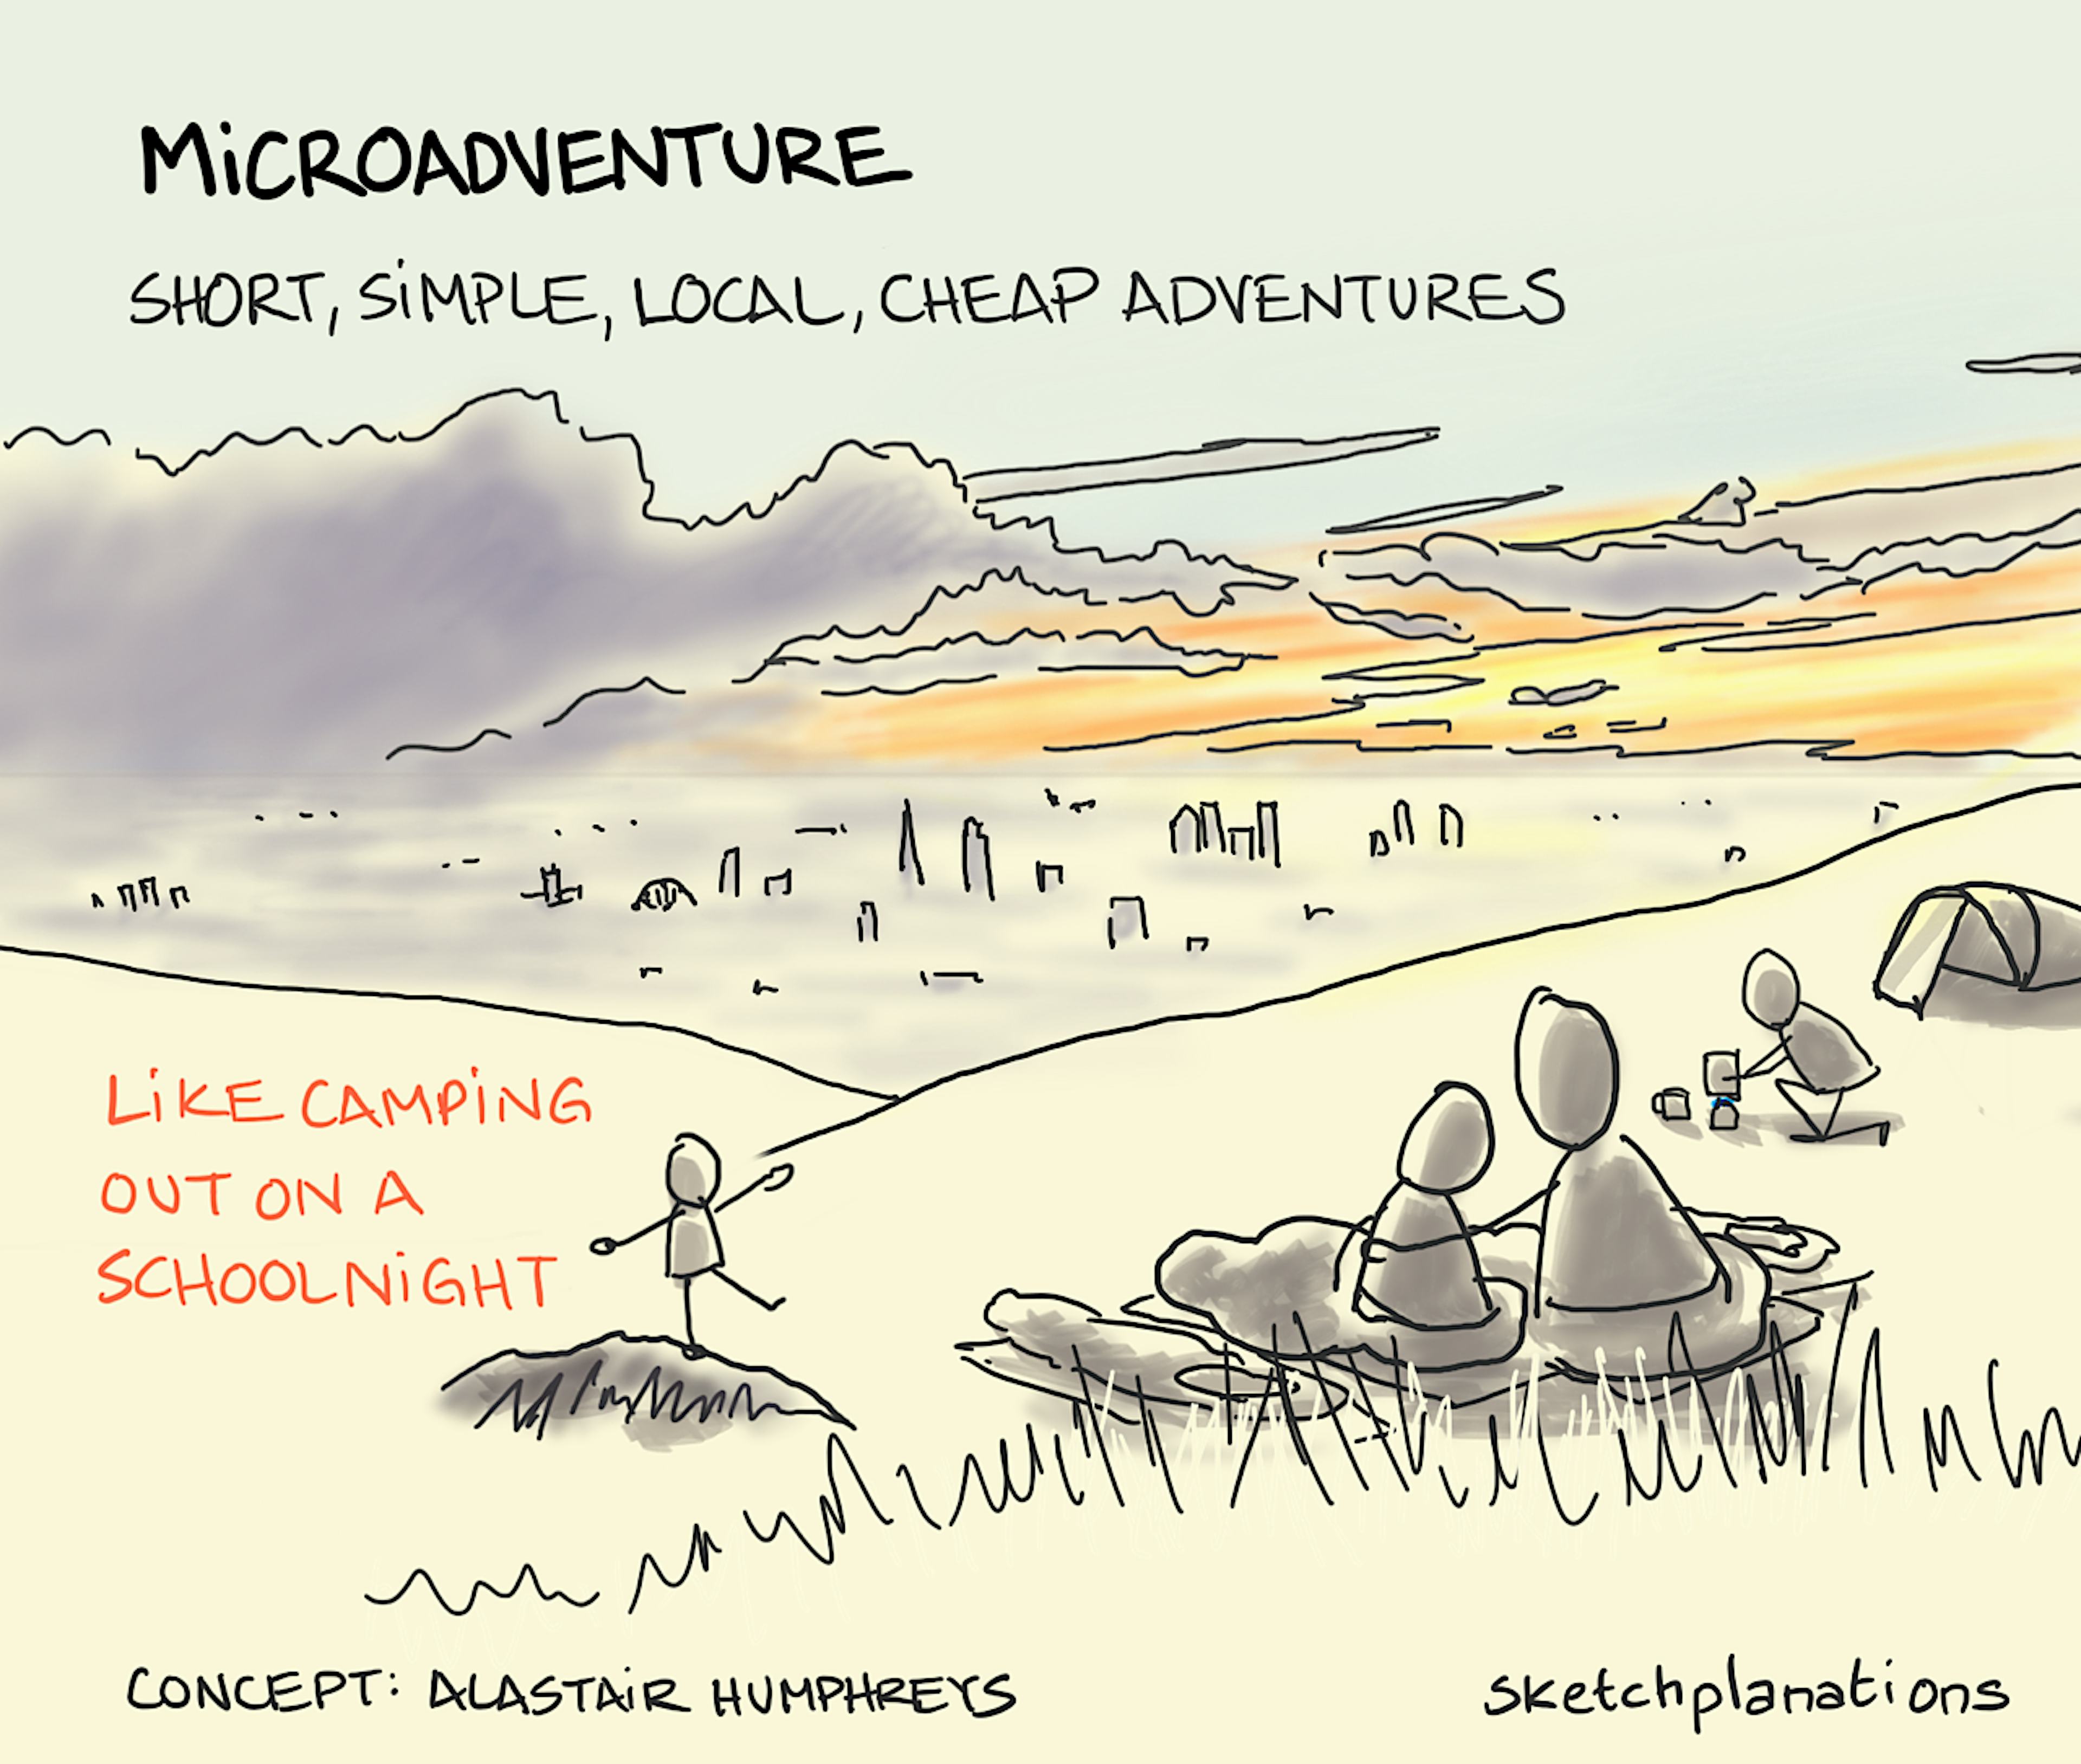 Microadventure illustration: as the sun sets over a cityscape in the valley below, a young family set up camp for the night - I wonder if they'd be able to see their house in the distance if it weren't so foggy down there. 